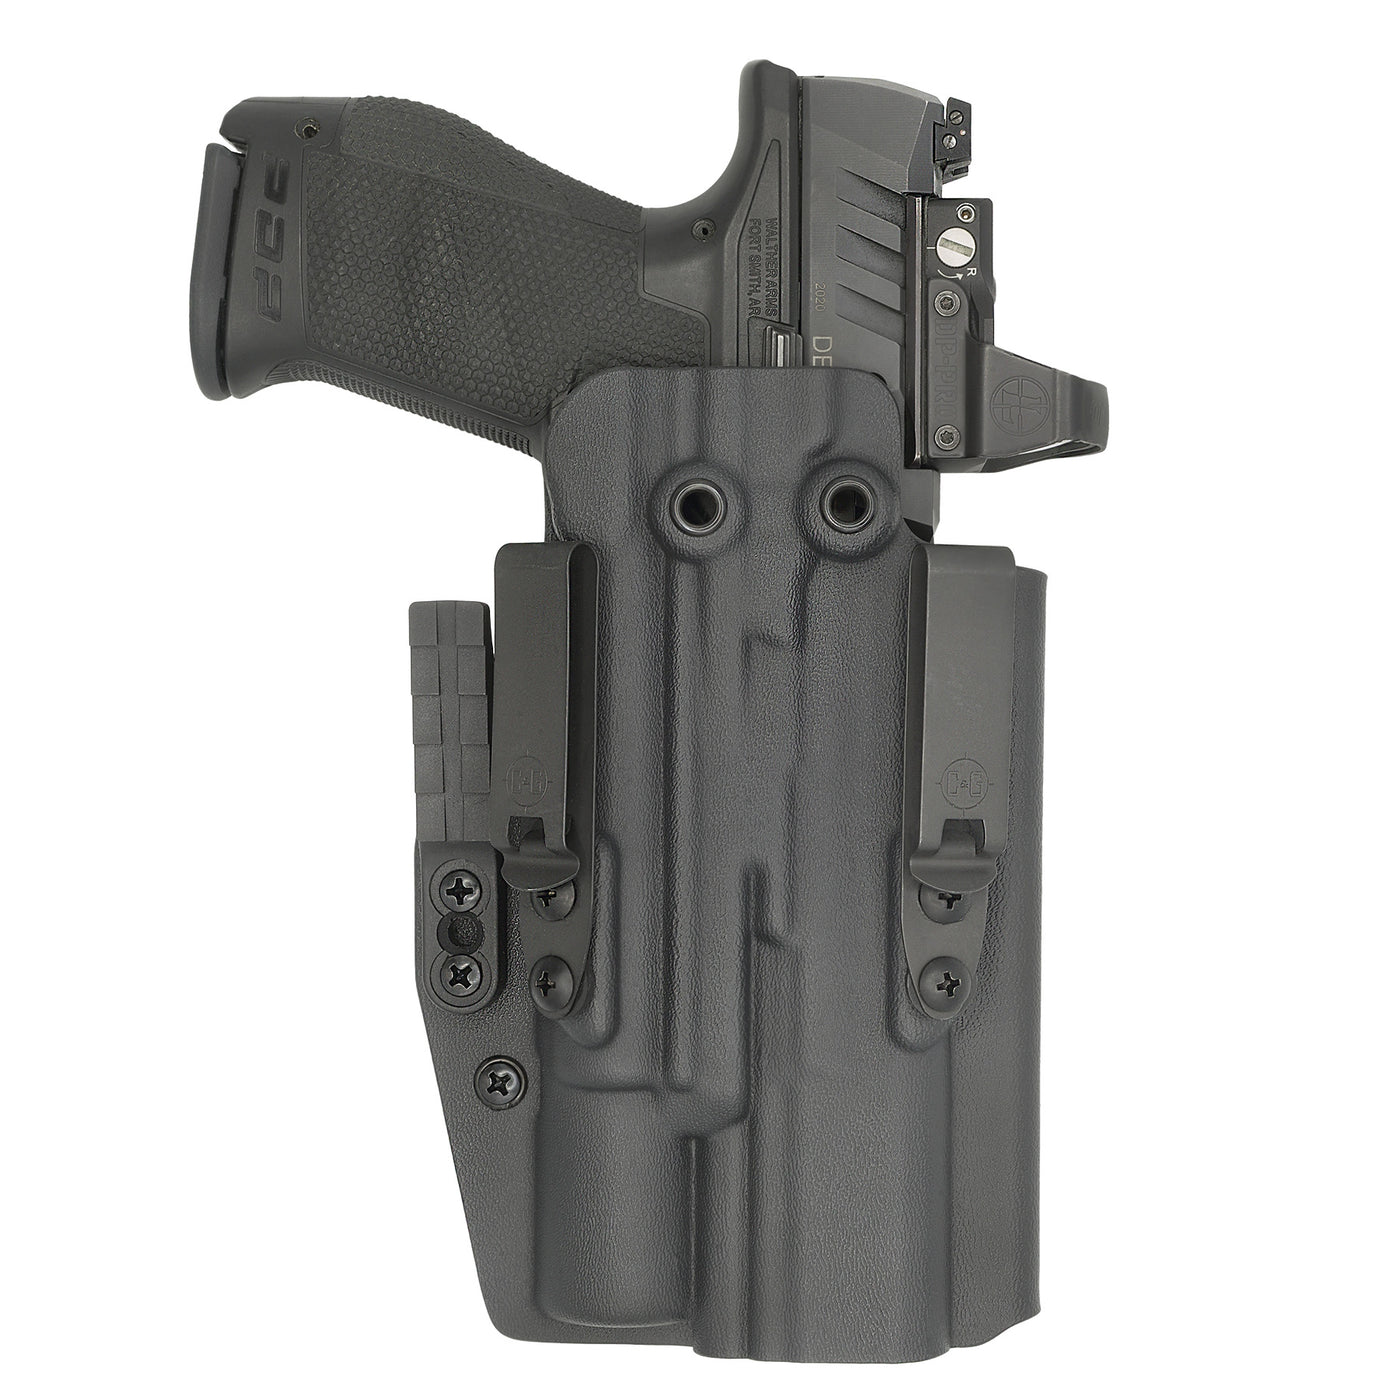 C&G Holsters custom IWB Tactical ALPHA UPGRADE FN 509 Surefire X300 in holstered position